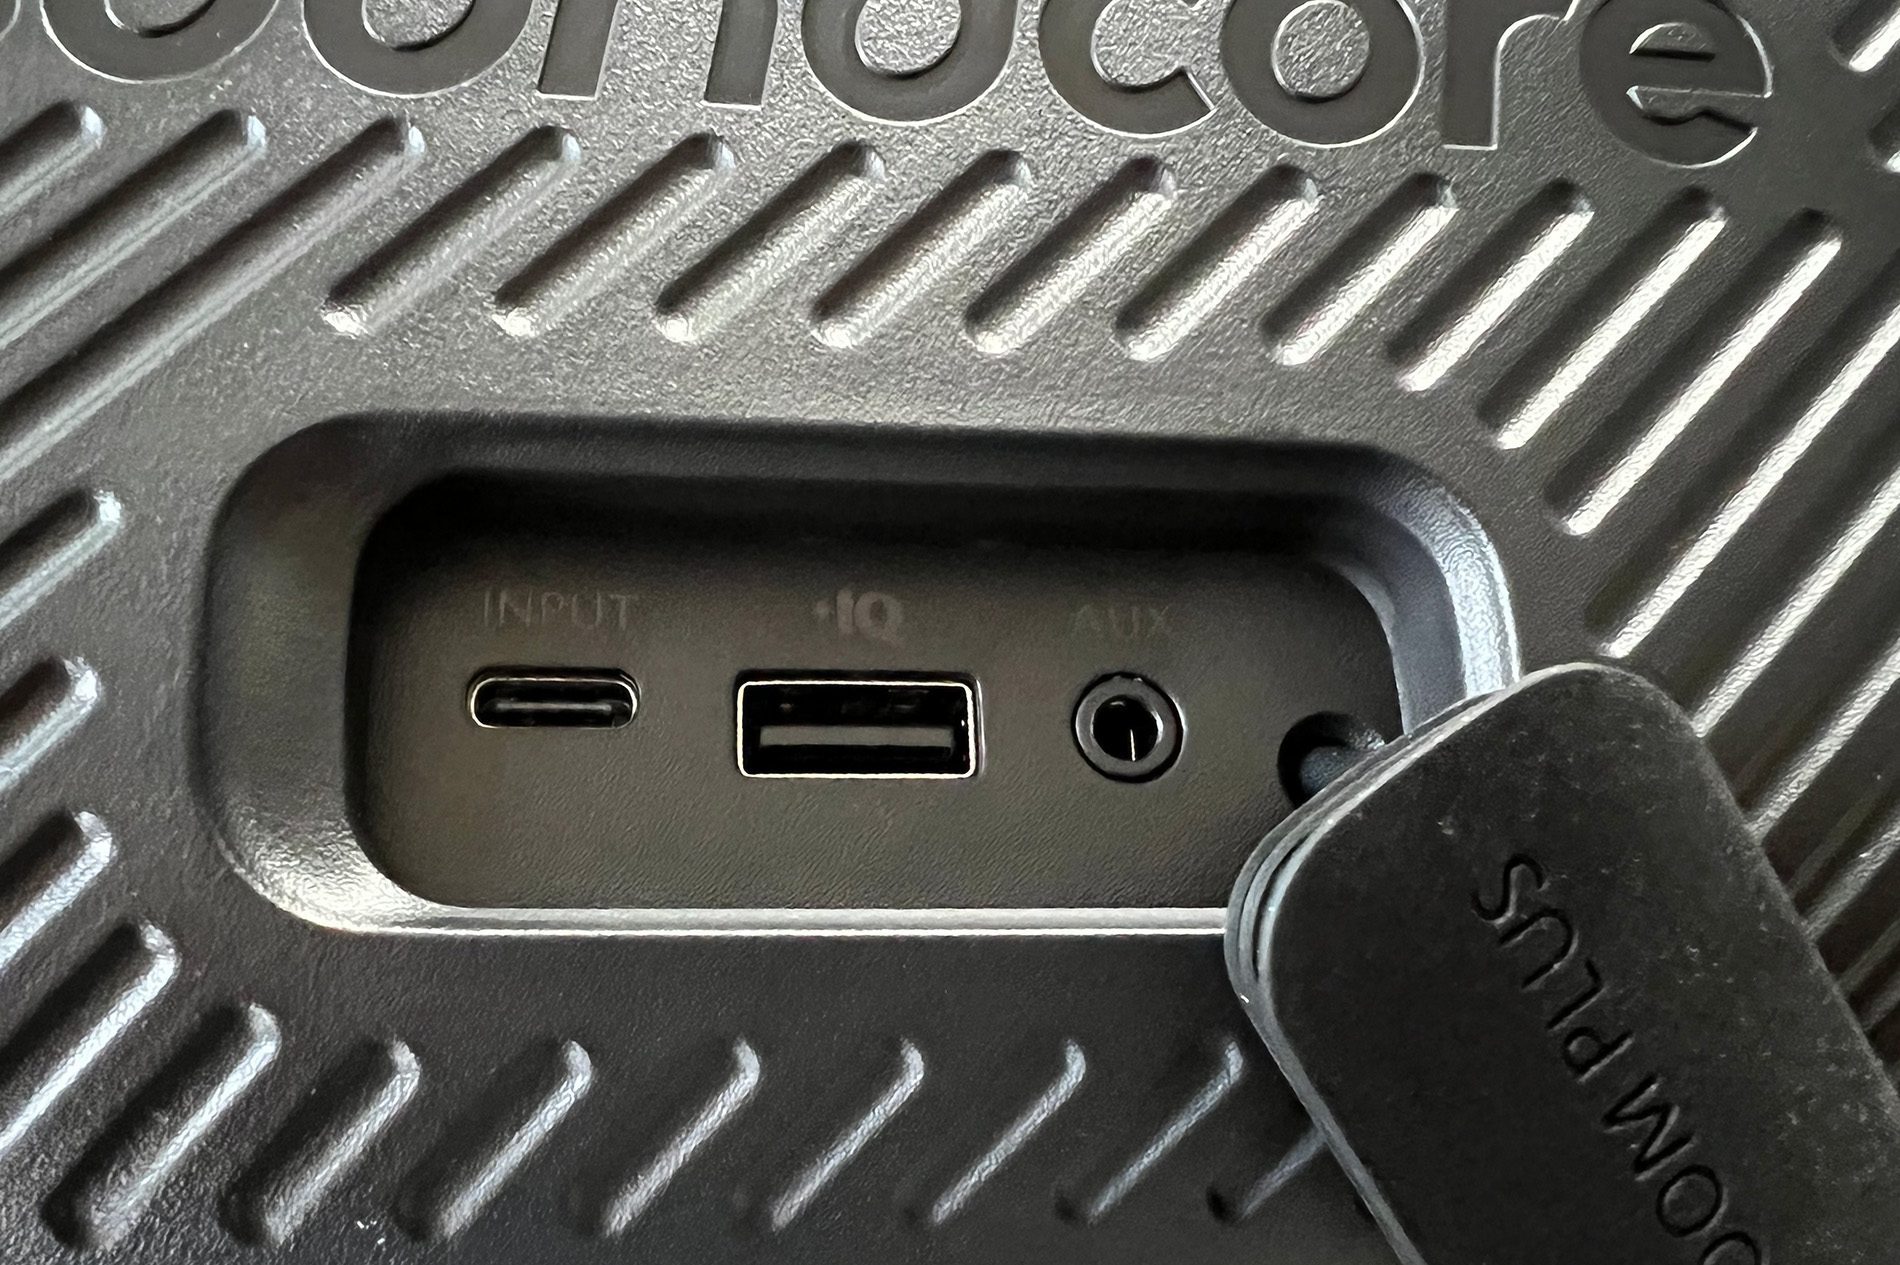 Here you can see the connections of the Soundcore Motion Boom Plus: USB-C for charging, USB-A for use as a power bank and a jack connection.